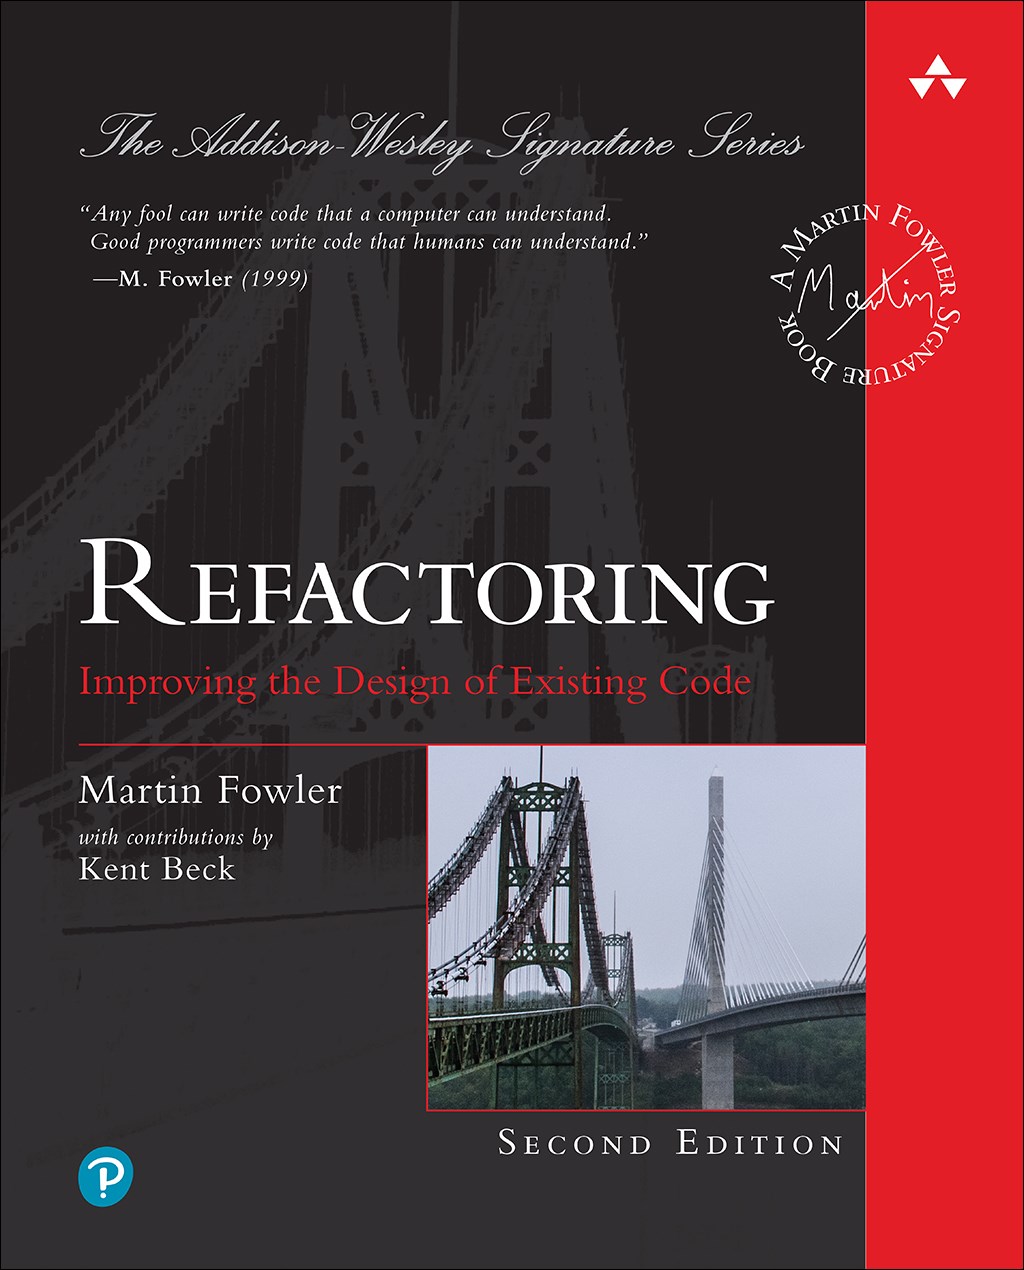 Refactoring: Improving the Design of Existing Code (Web Edition), 2nd Edition